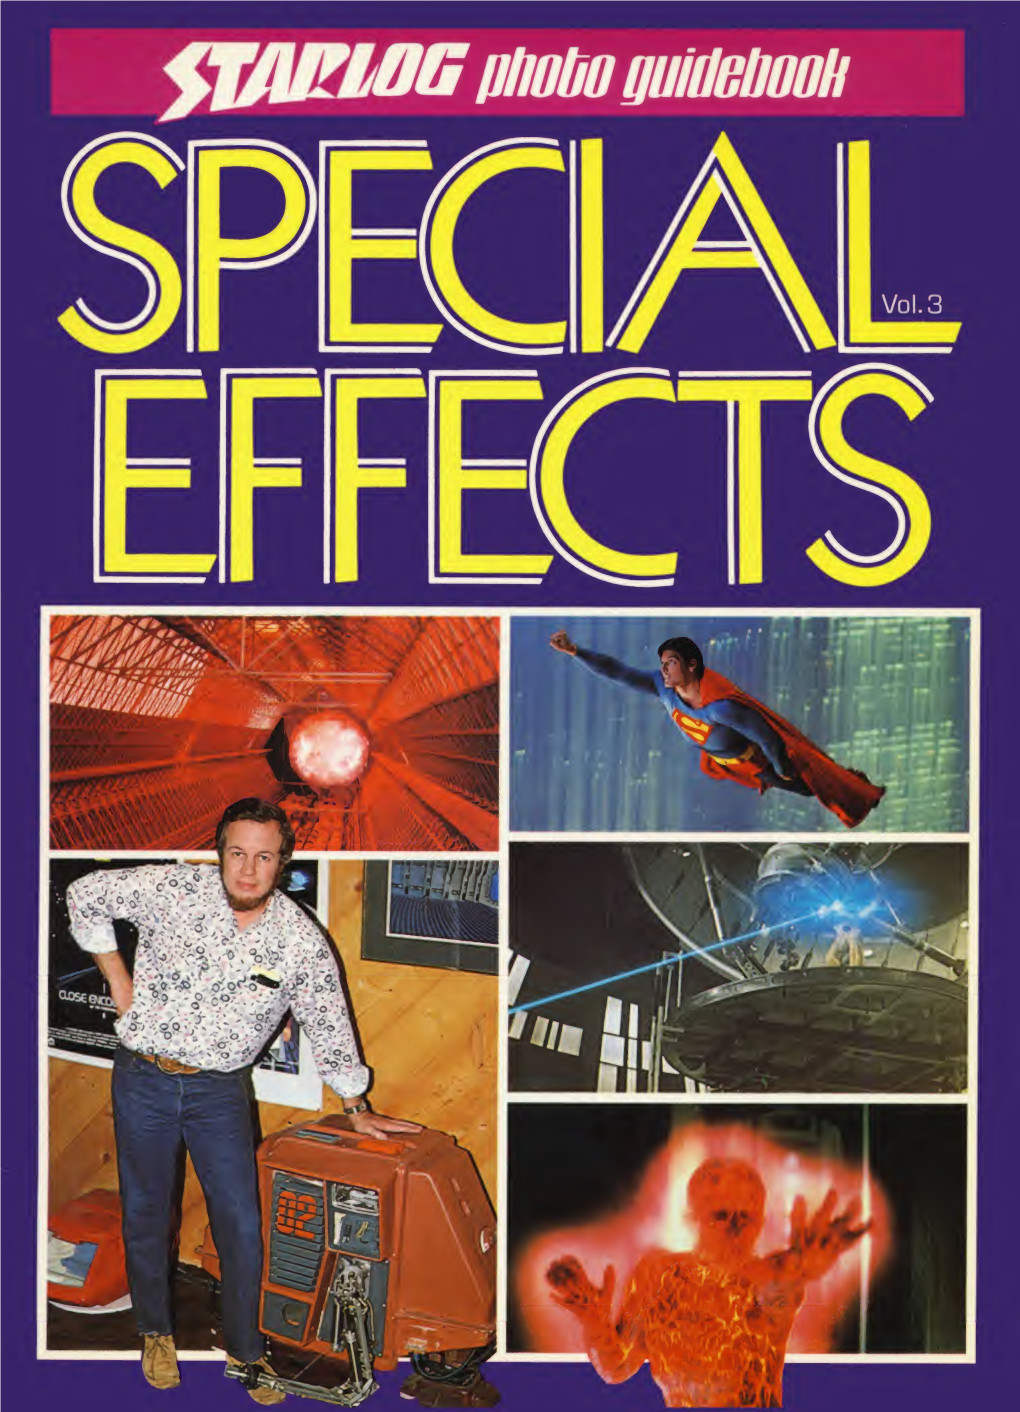 Starlog Photo Guidebook Special Effects Vol 3